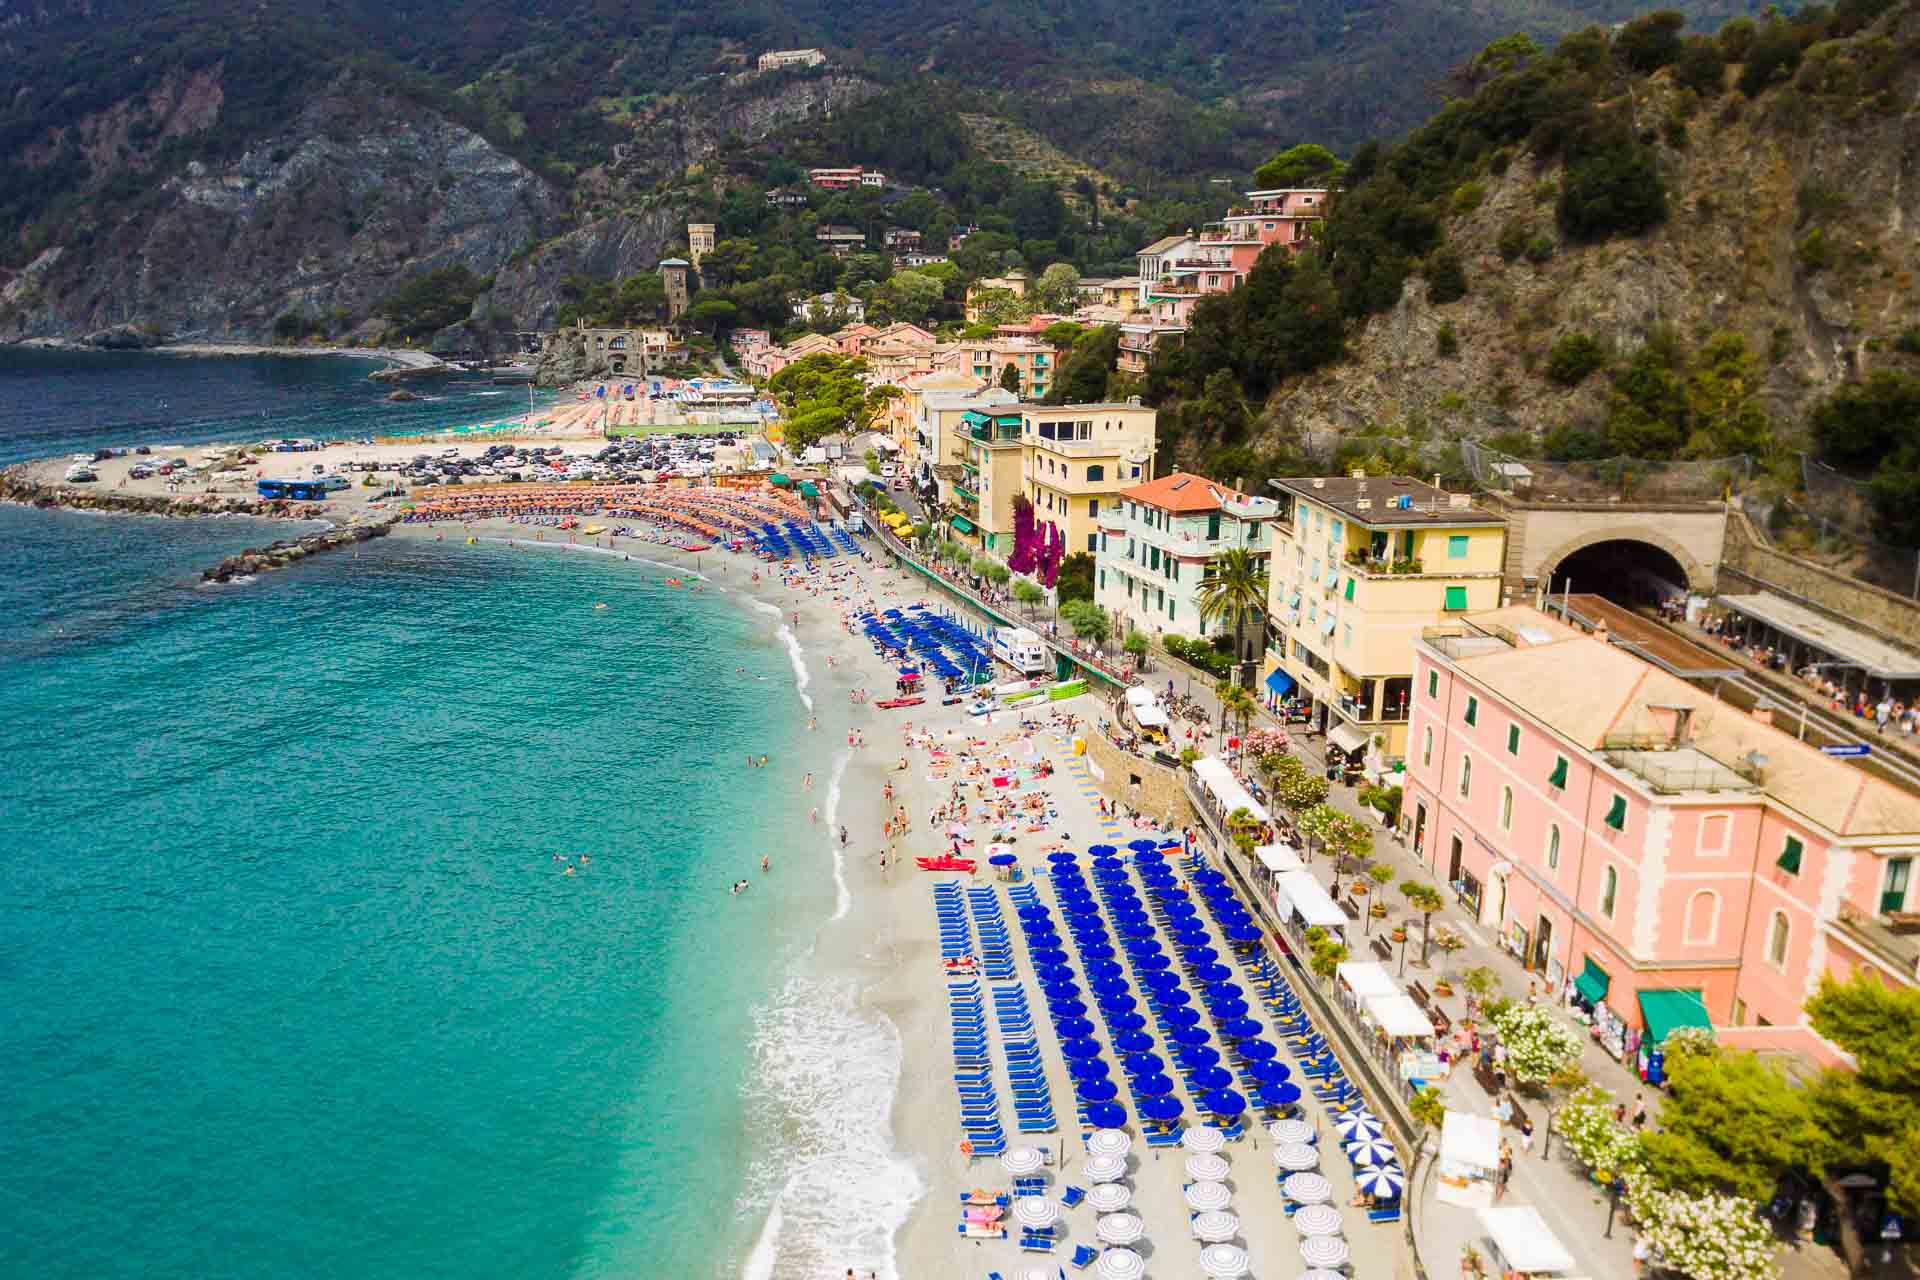 aerial view of a crowded beach in Italy full of beach sunshades and the train station right next to the beach